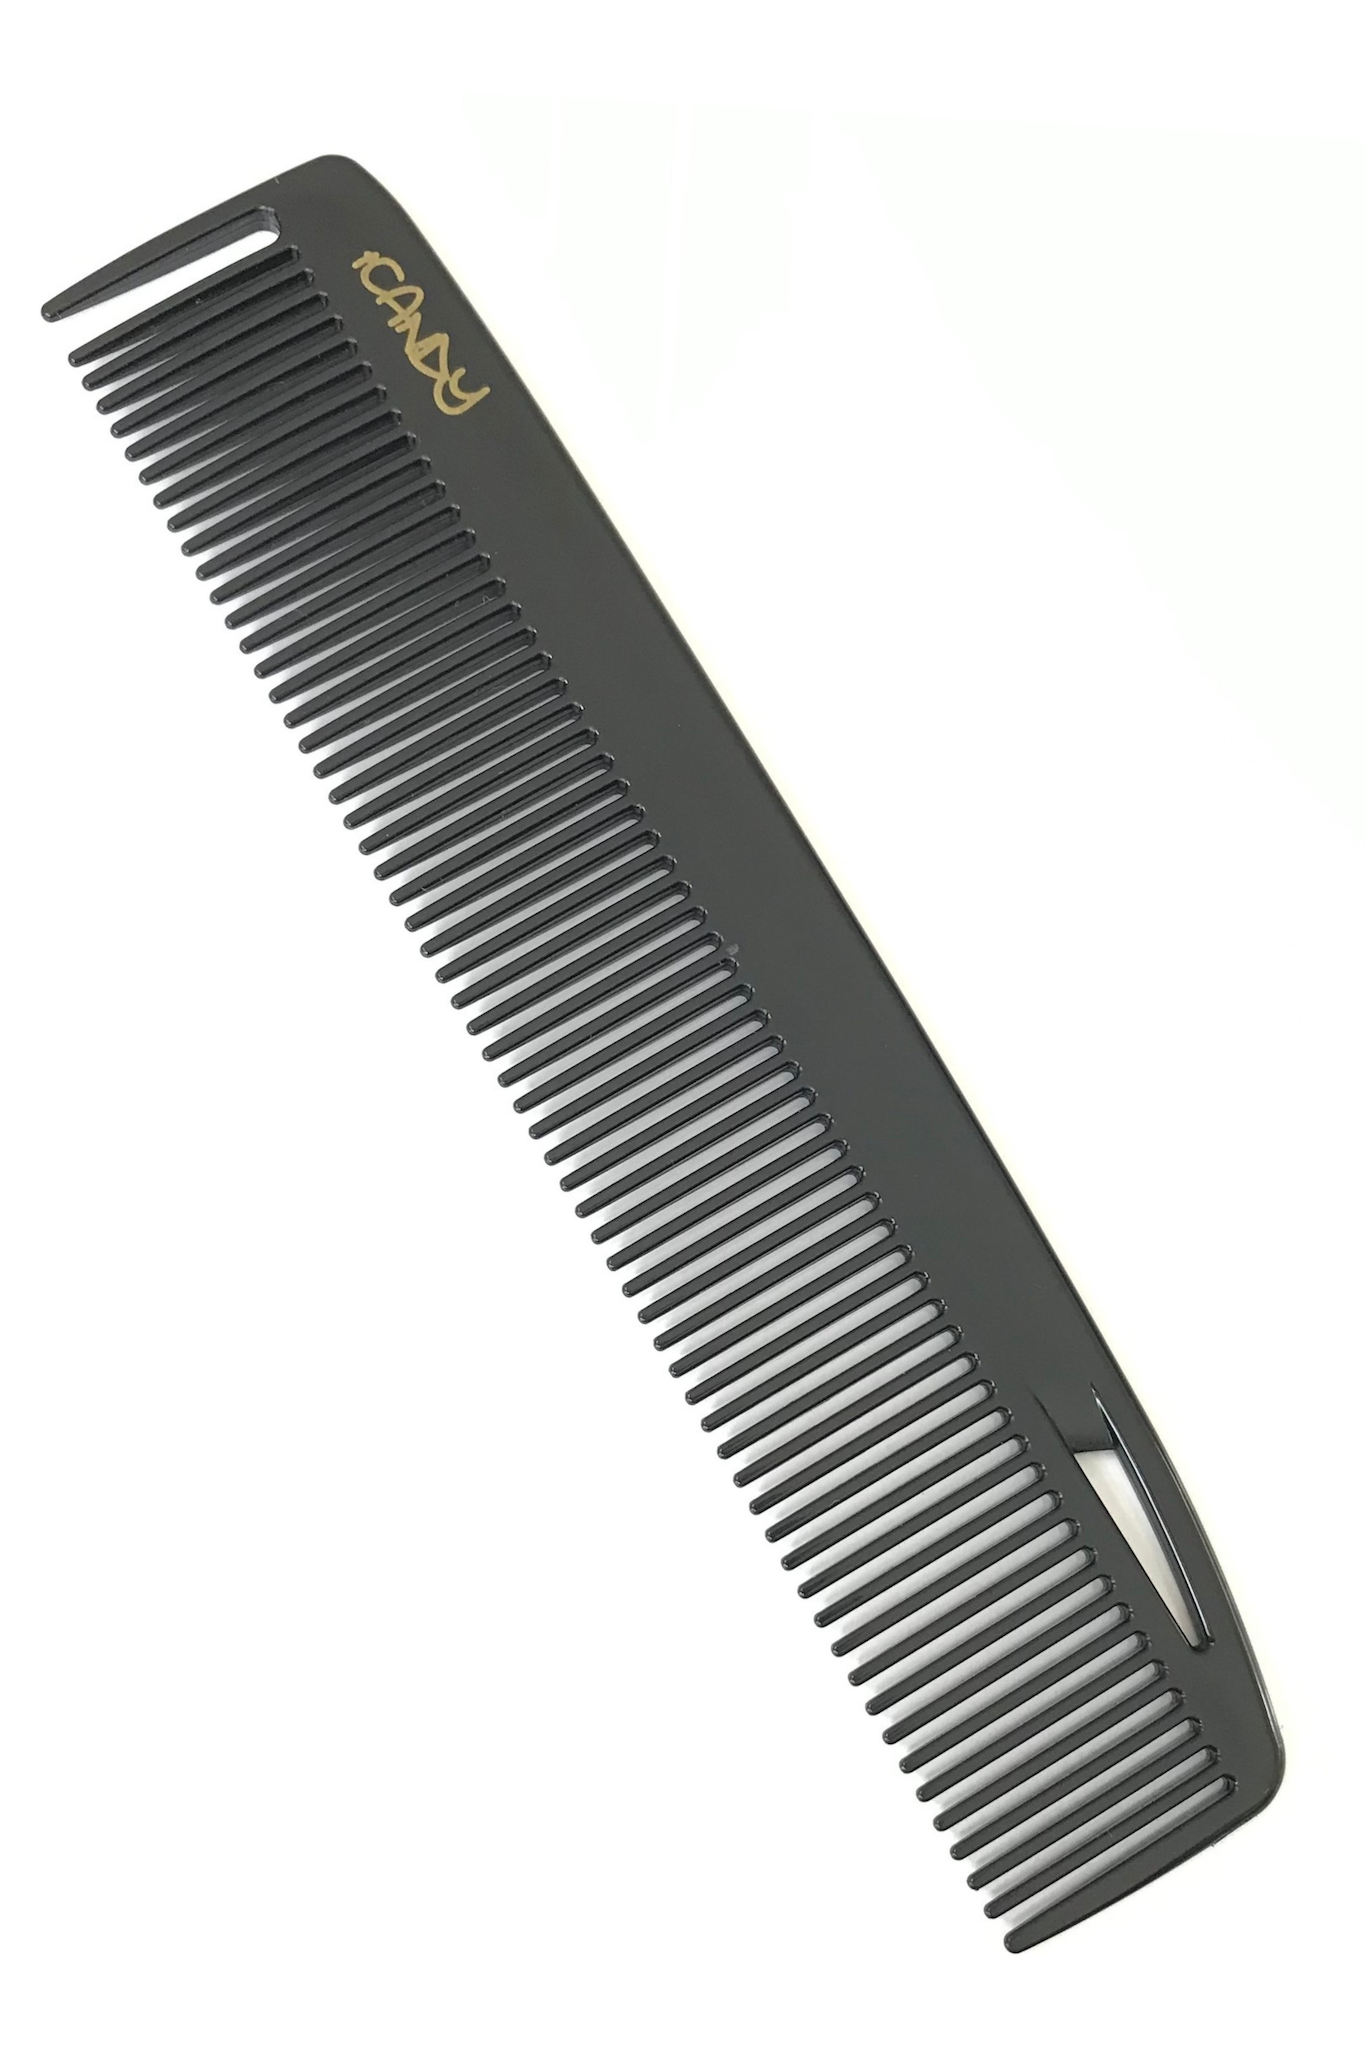 iCandy Creative Series MIDNIGHT BLACK Cutting Comb 180mm 